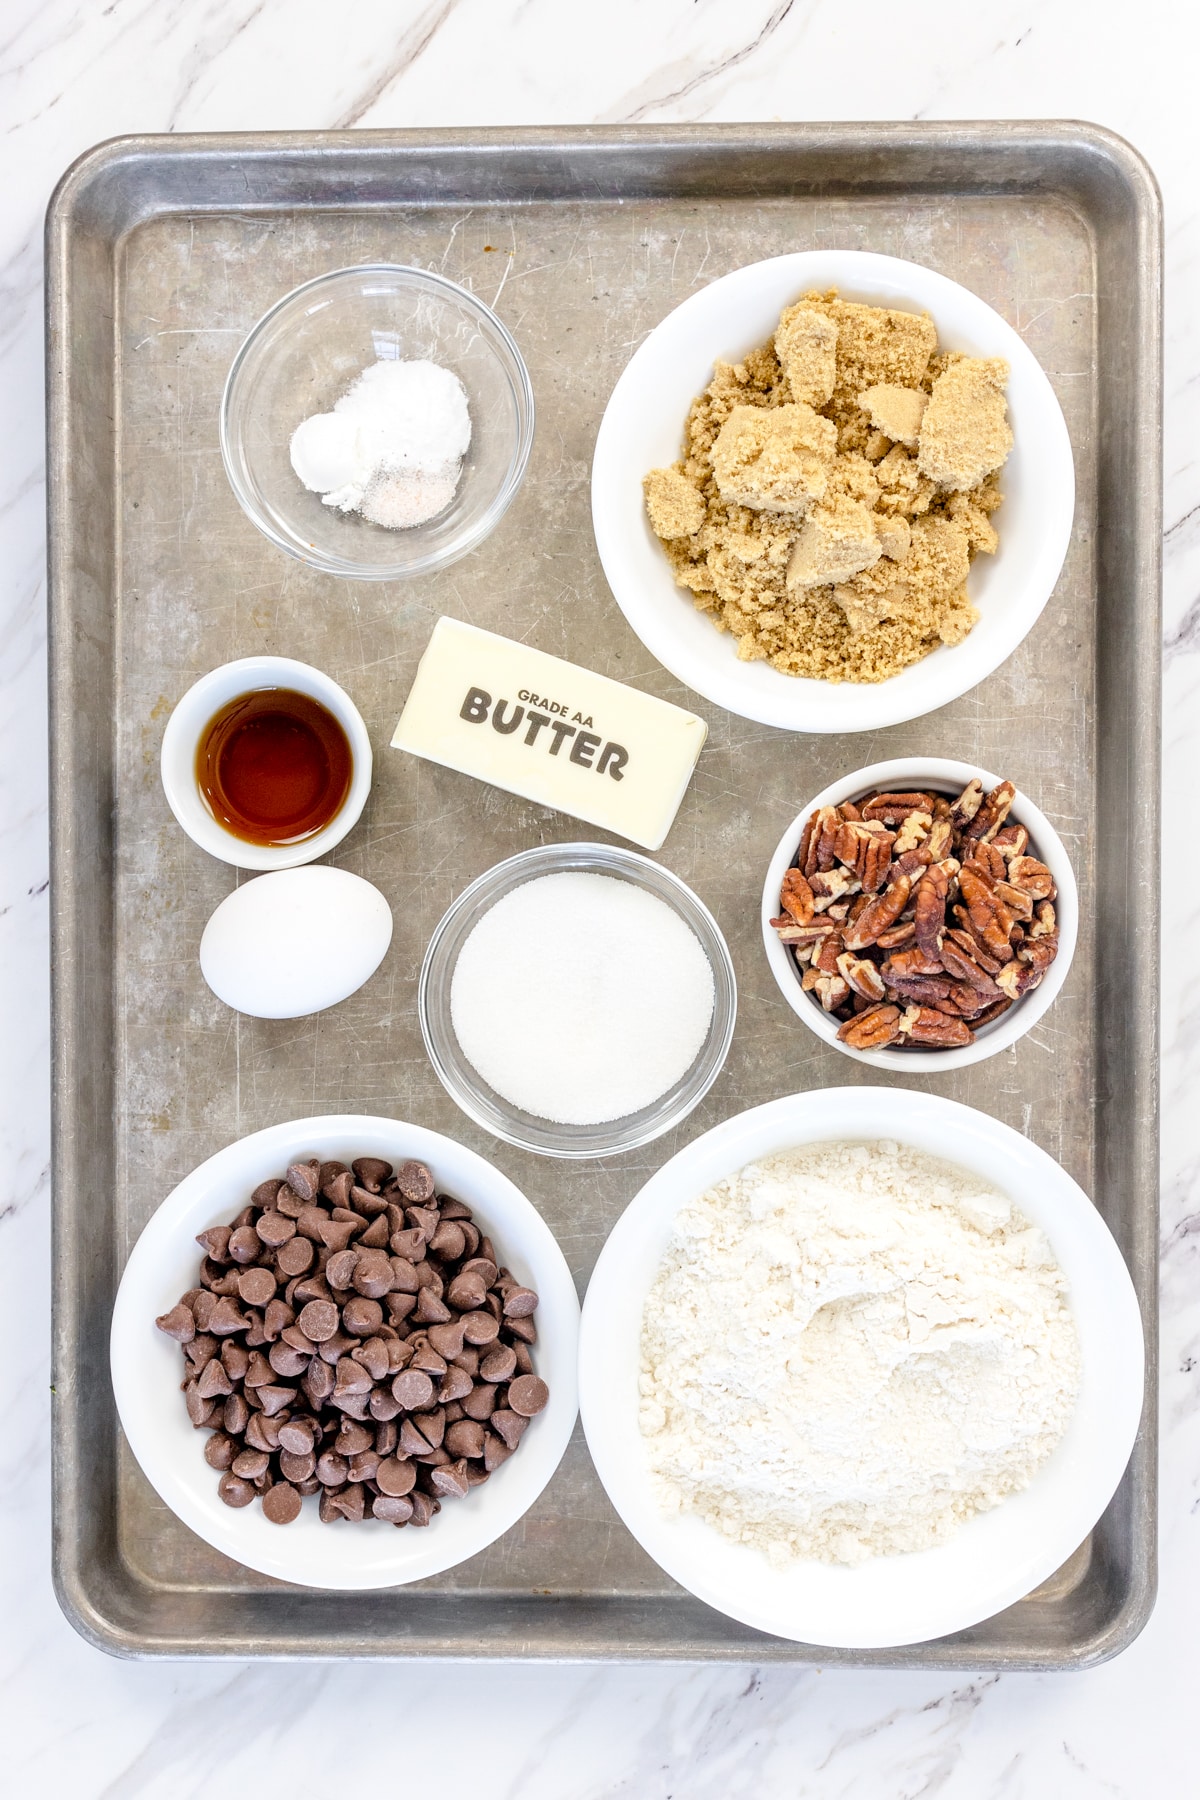 Top view of ingredients needed to make chocolate chip pecan cookies in small bowls on a baking tray.